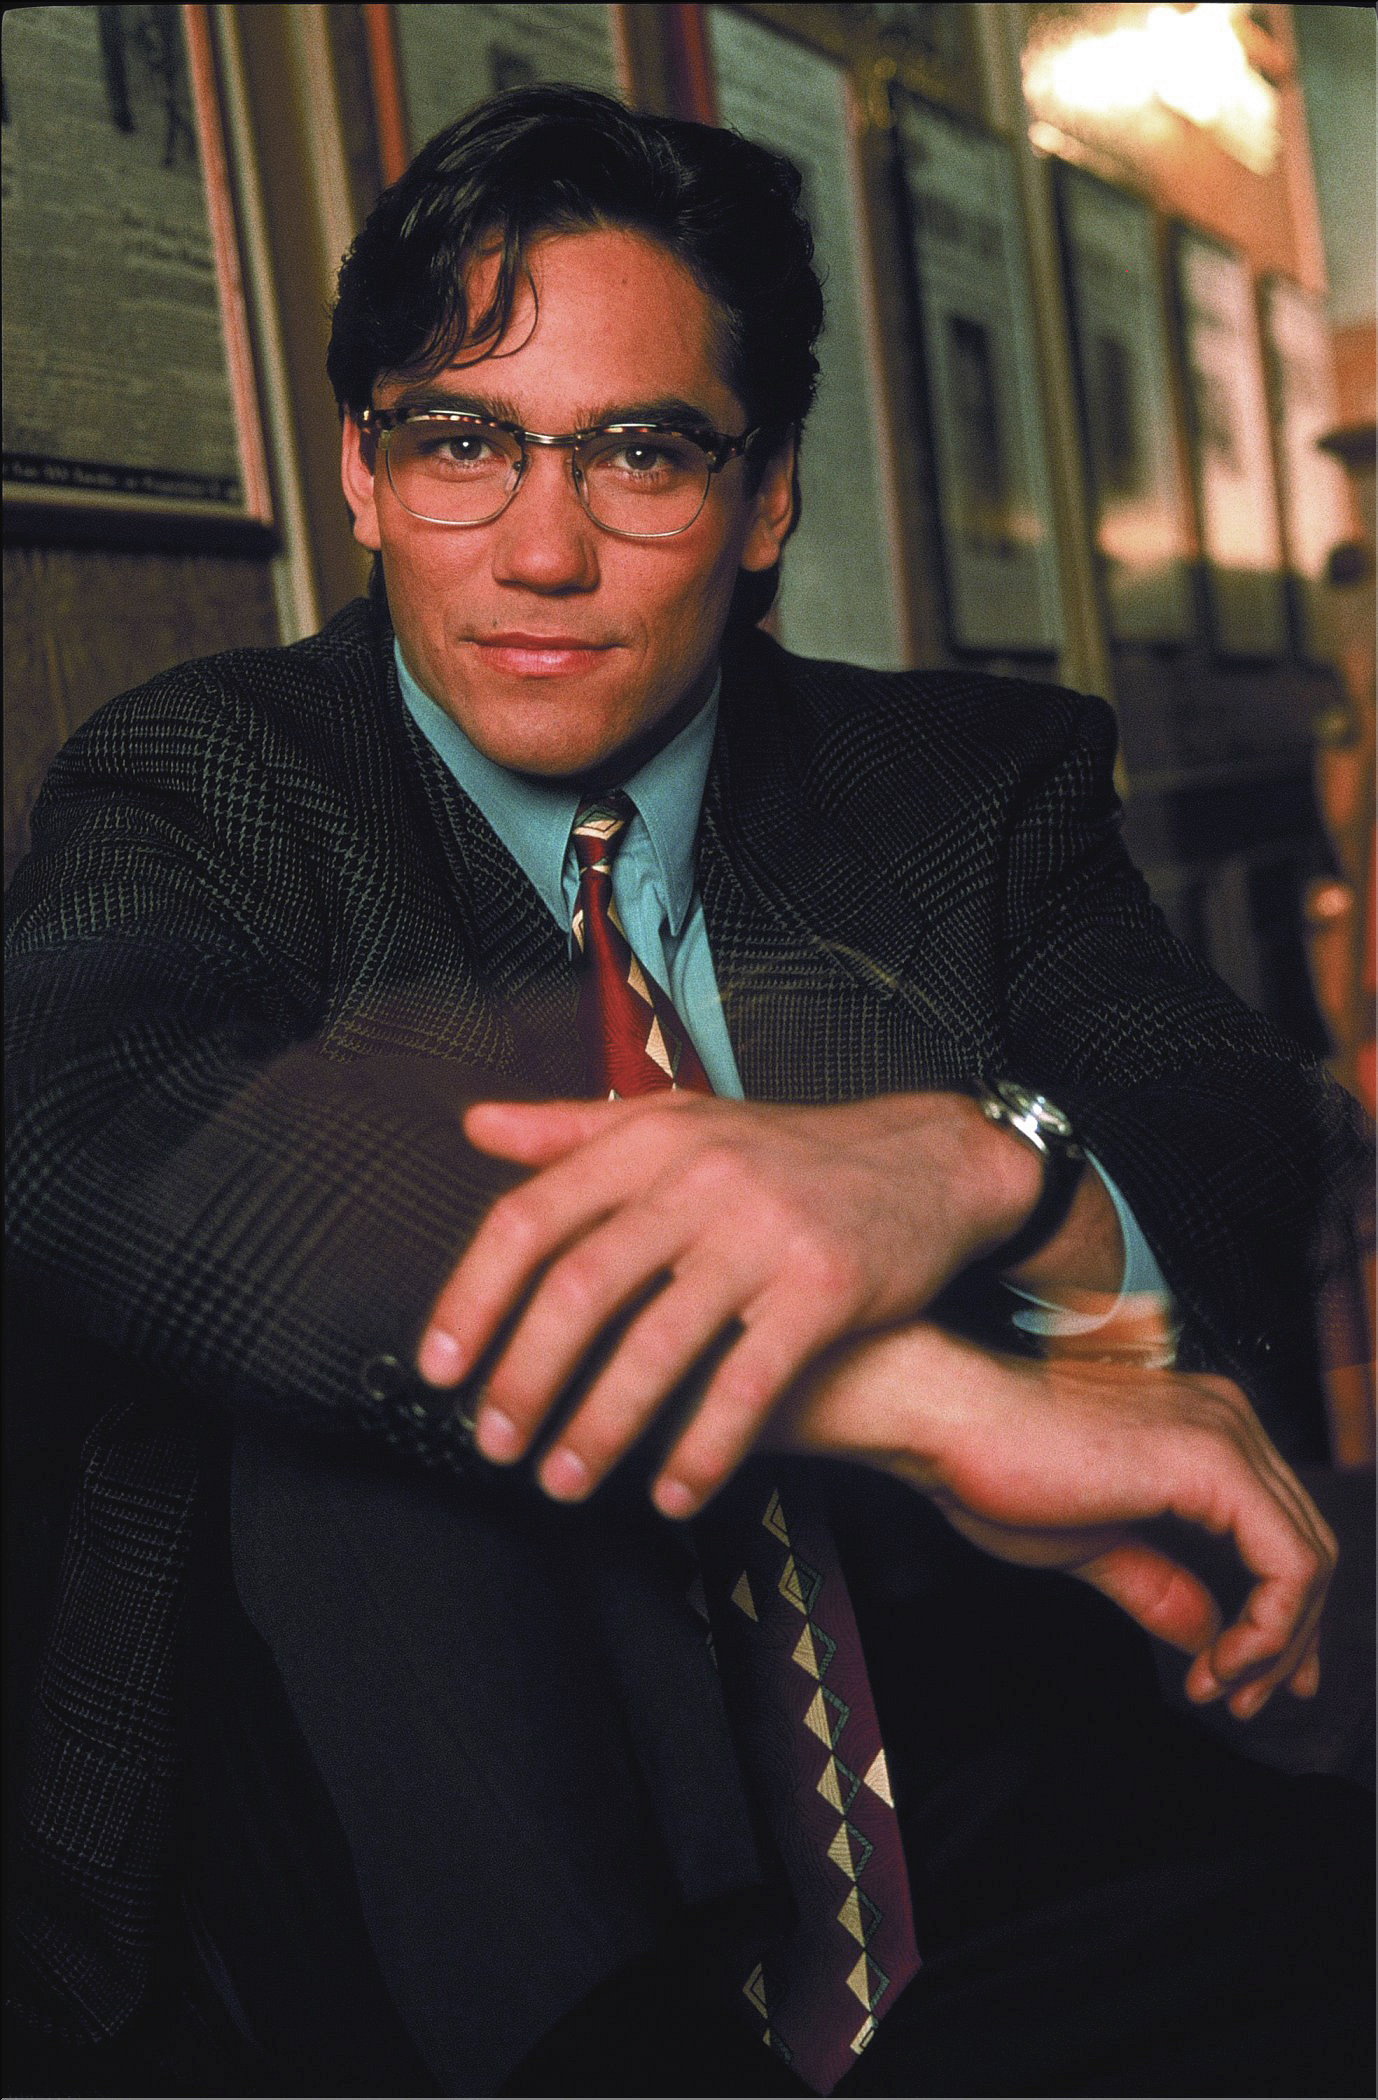 Lois and Clark: The New Adventures of Superman: Dean Cain, The main protagonist in the 90s superhero television series, Created by Jerry Siegel and Joe Shuster. 1380x2100 HD Wallpaper.